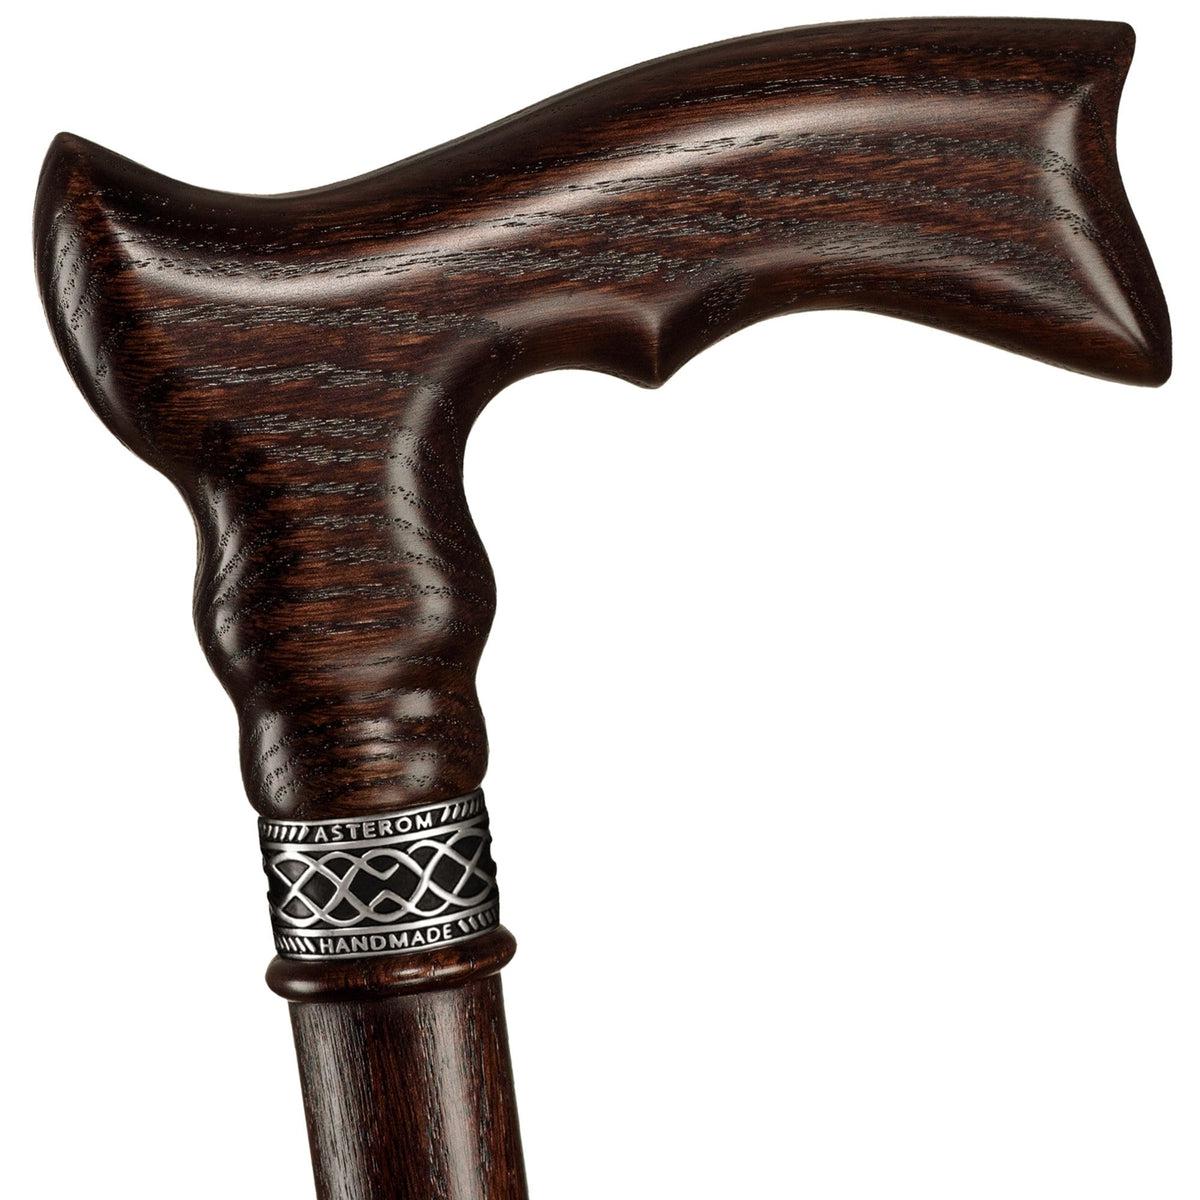 Fashionable Wooden Vintage Walking Cane For Men and Women